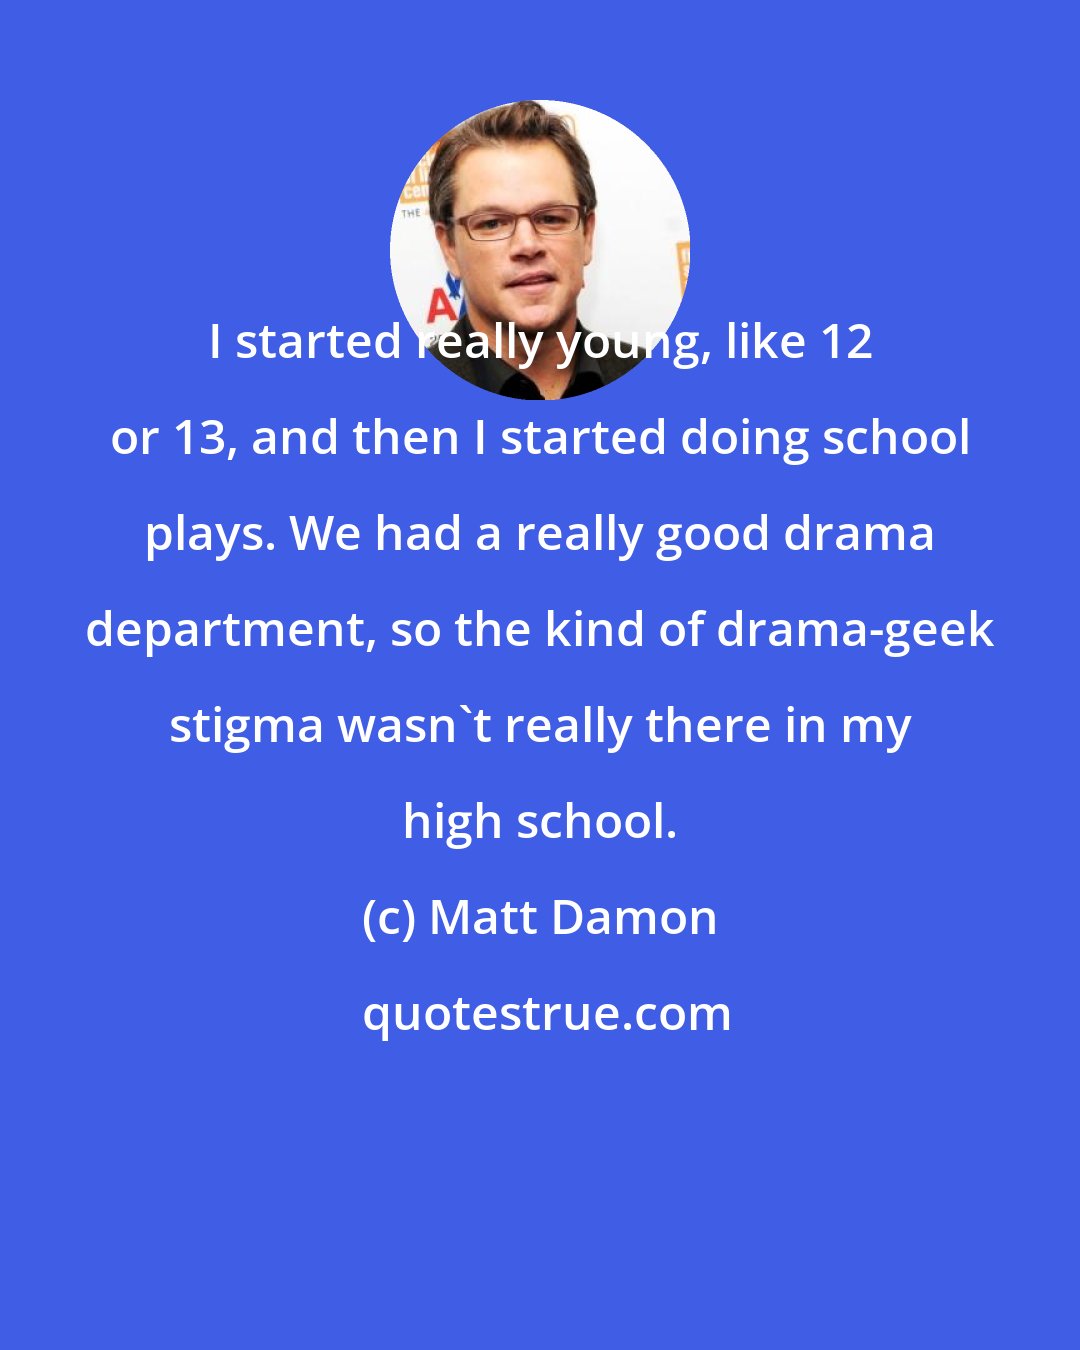 Matt Damon: I started really young, like 12 or 13, and then I started doing school plays. We had a really good drama department, so the kind of drama-geek stigma wasn't really there in my high school.